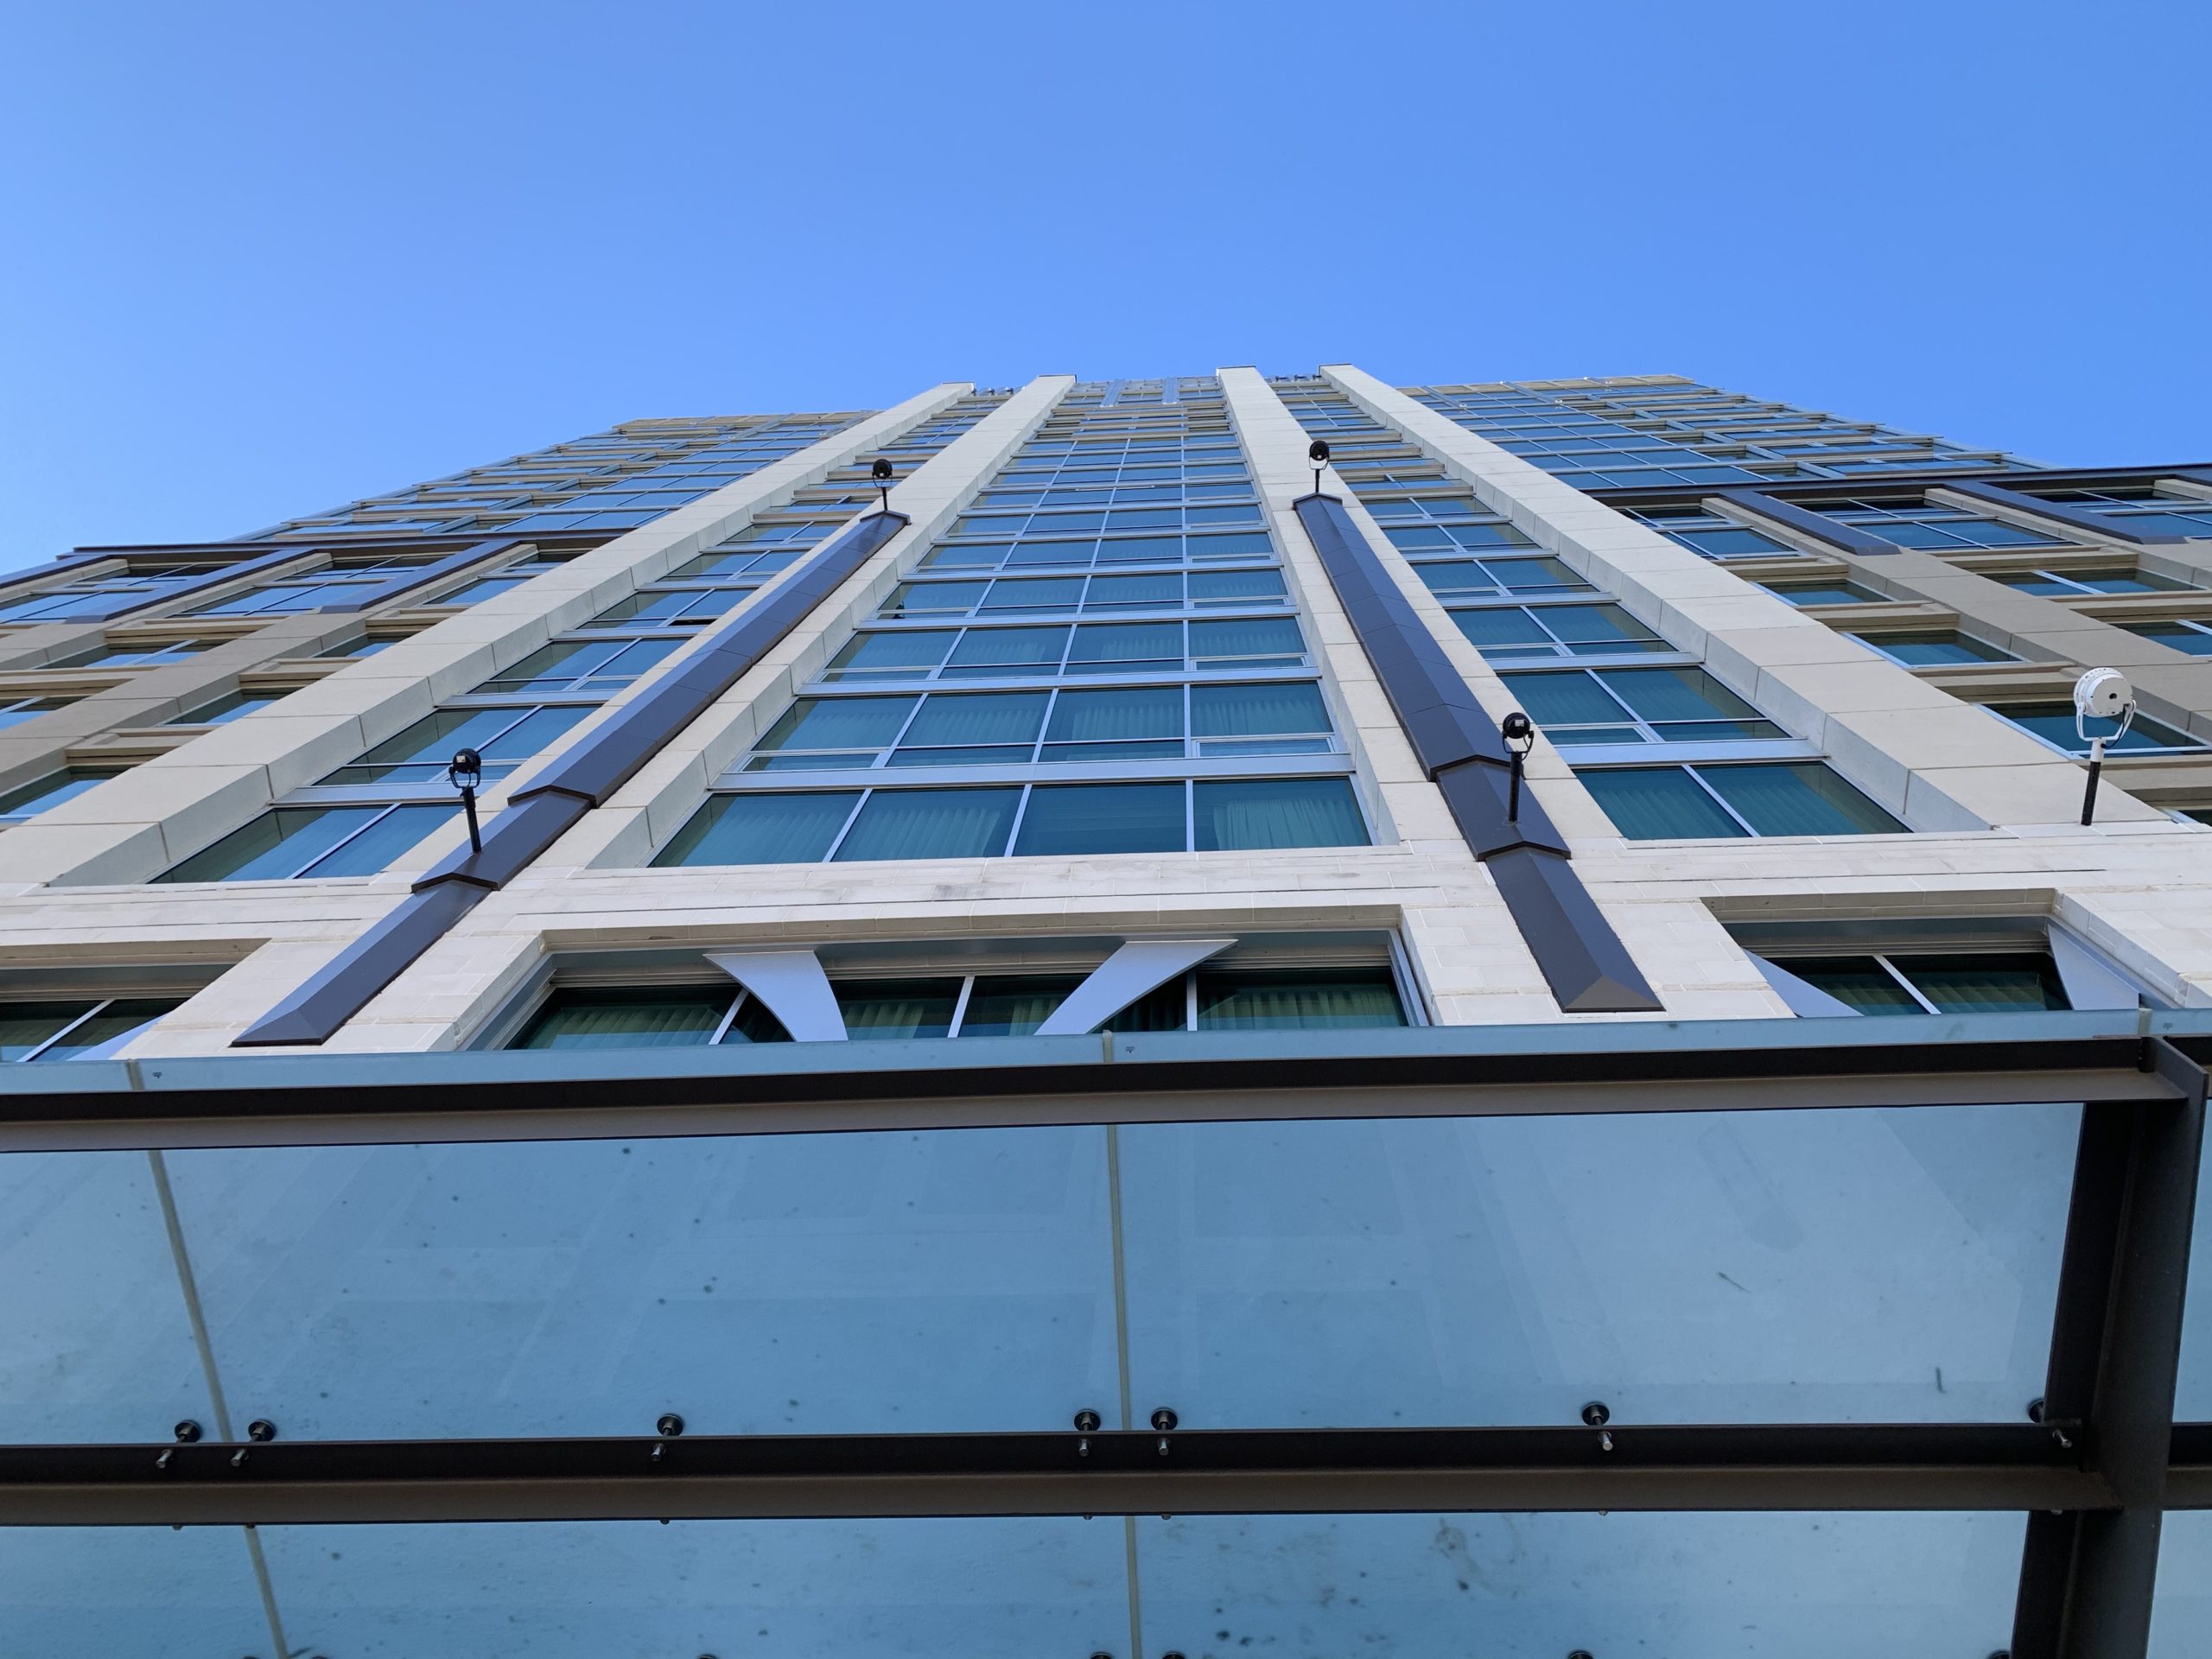 looking up a tall building with glass windows